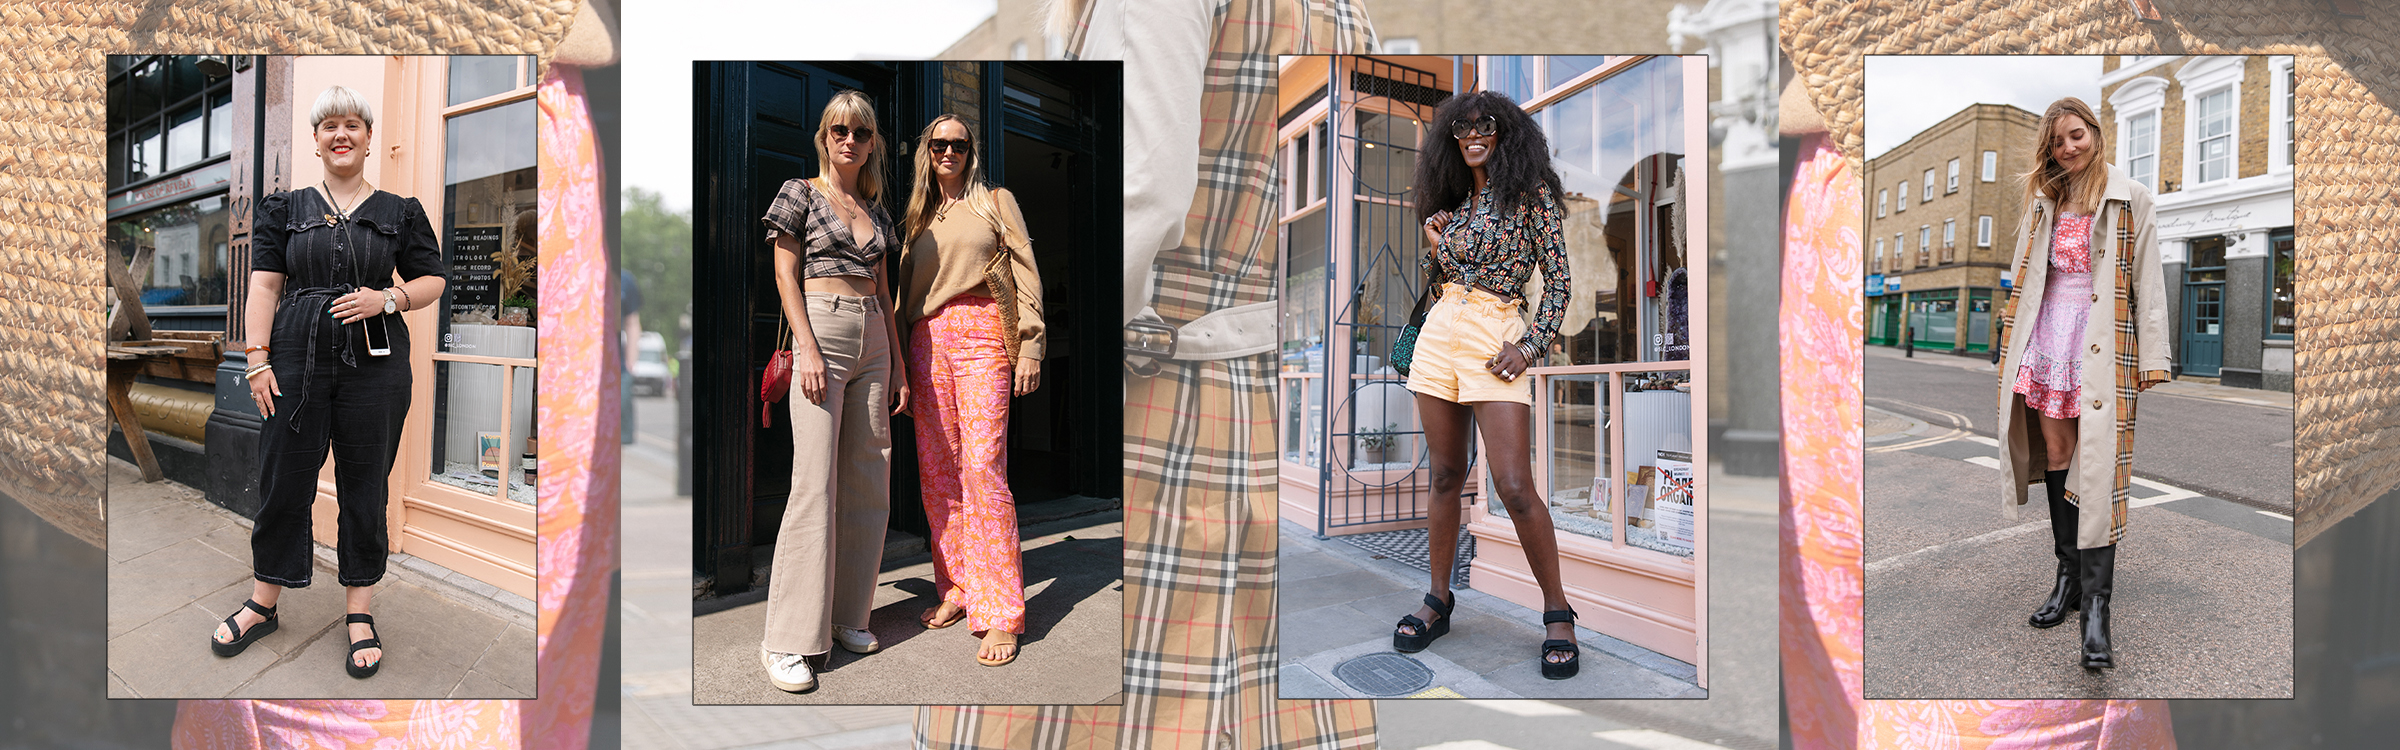 I Went Street Style–Spotting in East London, and These Outfits Wowed Me